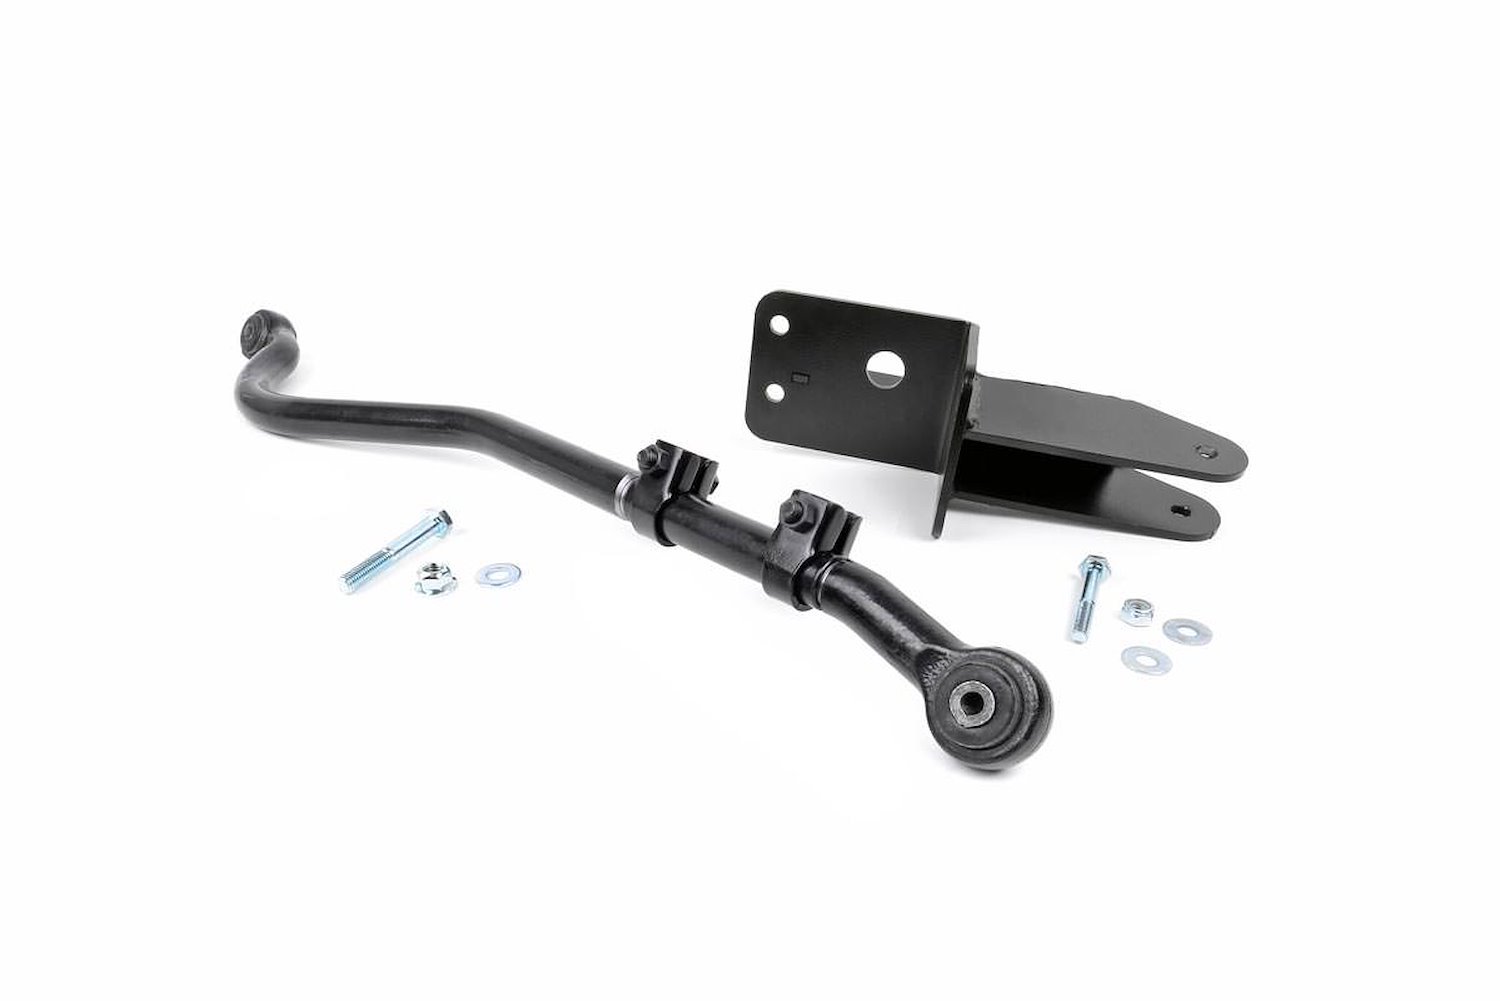 1042 Front Forged Adjustable Track Bar for 4-6.5-inch Lifts